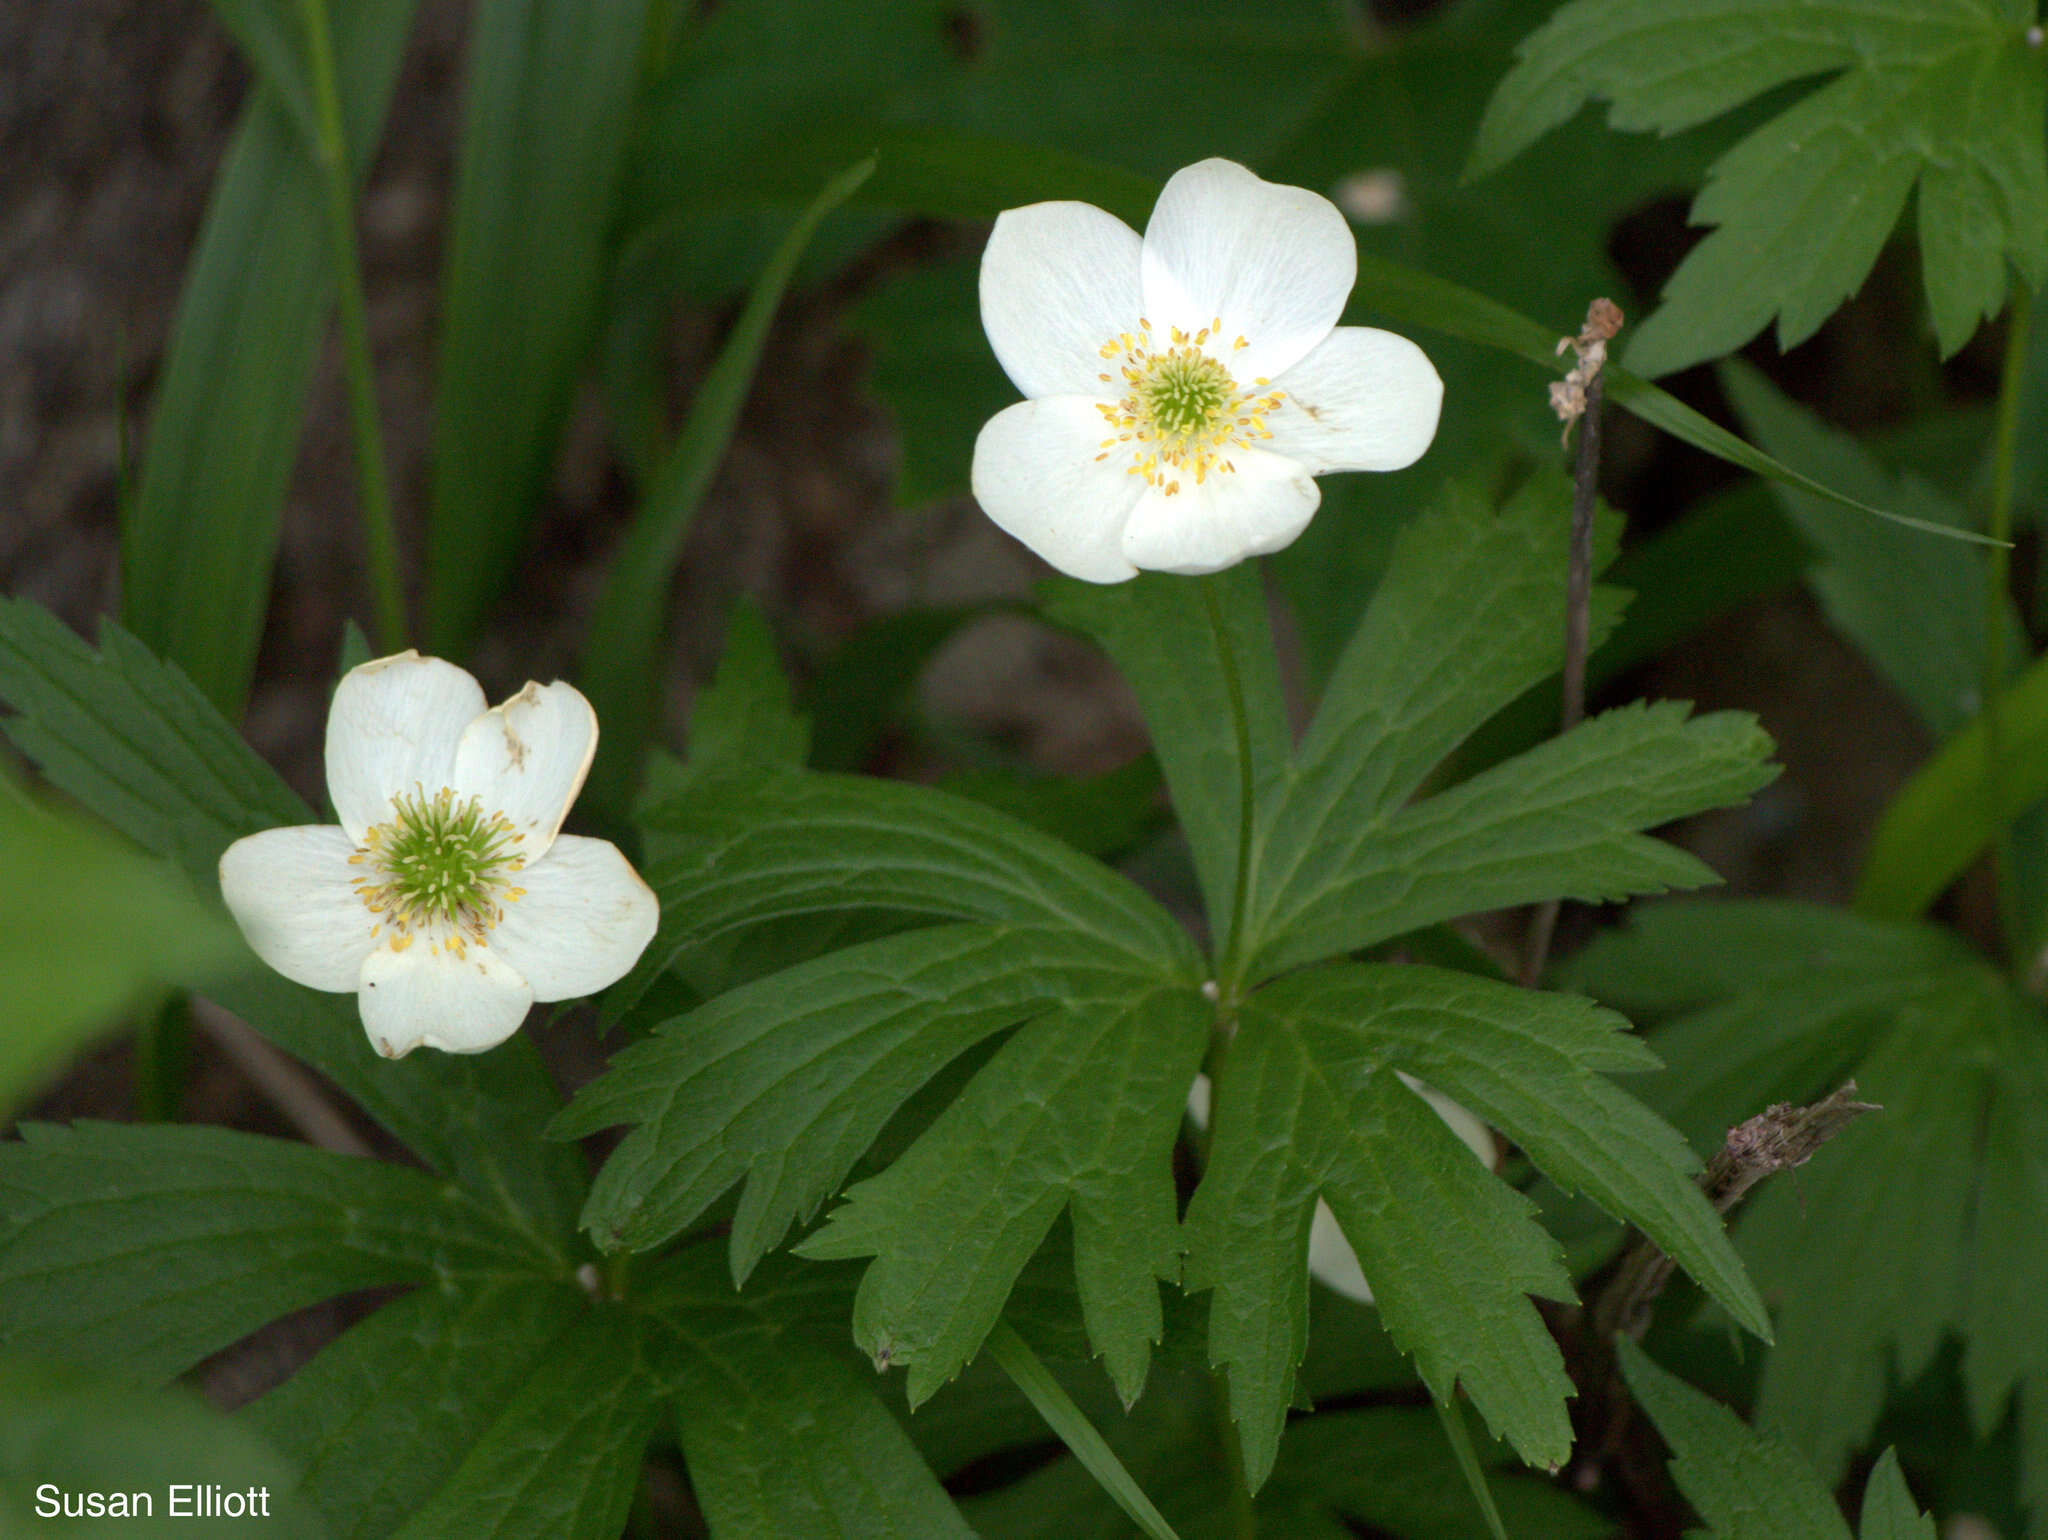 Image of Canadian anemone